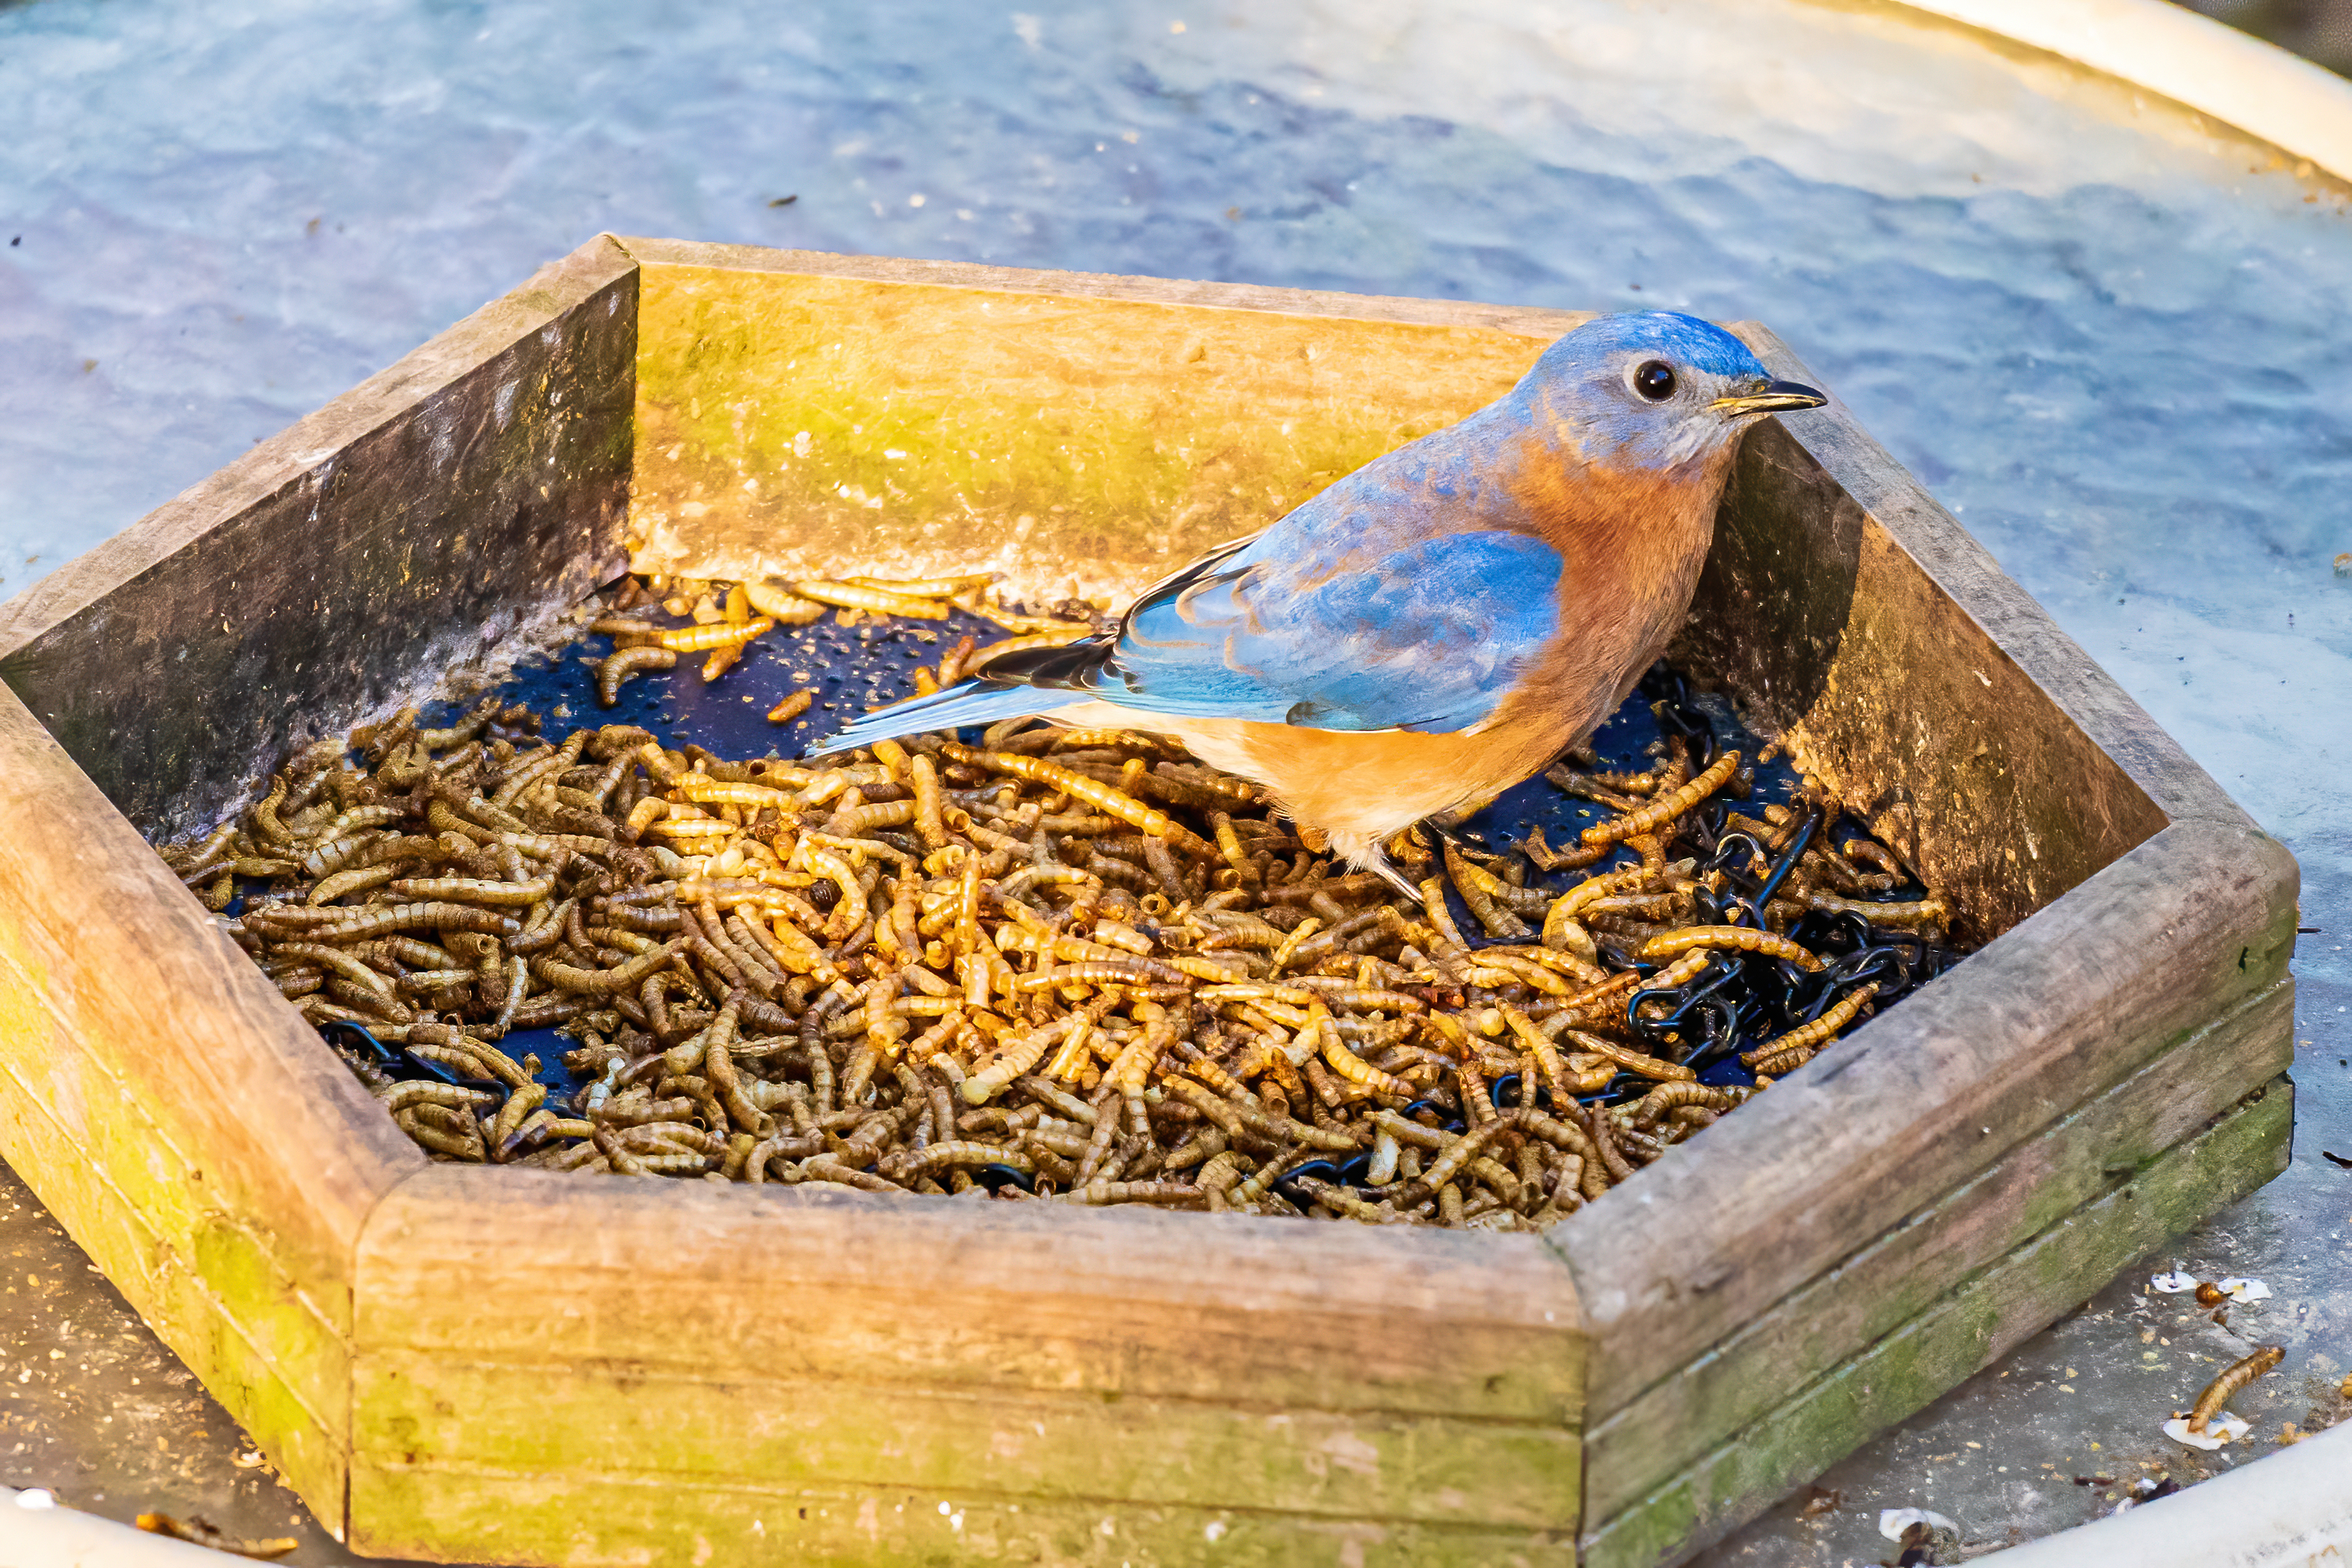 Teaching-a-bird-to-eat-Weaned-baby-bird-In-tray-of-mealworms